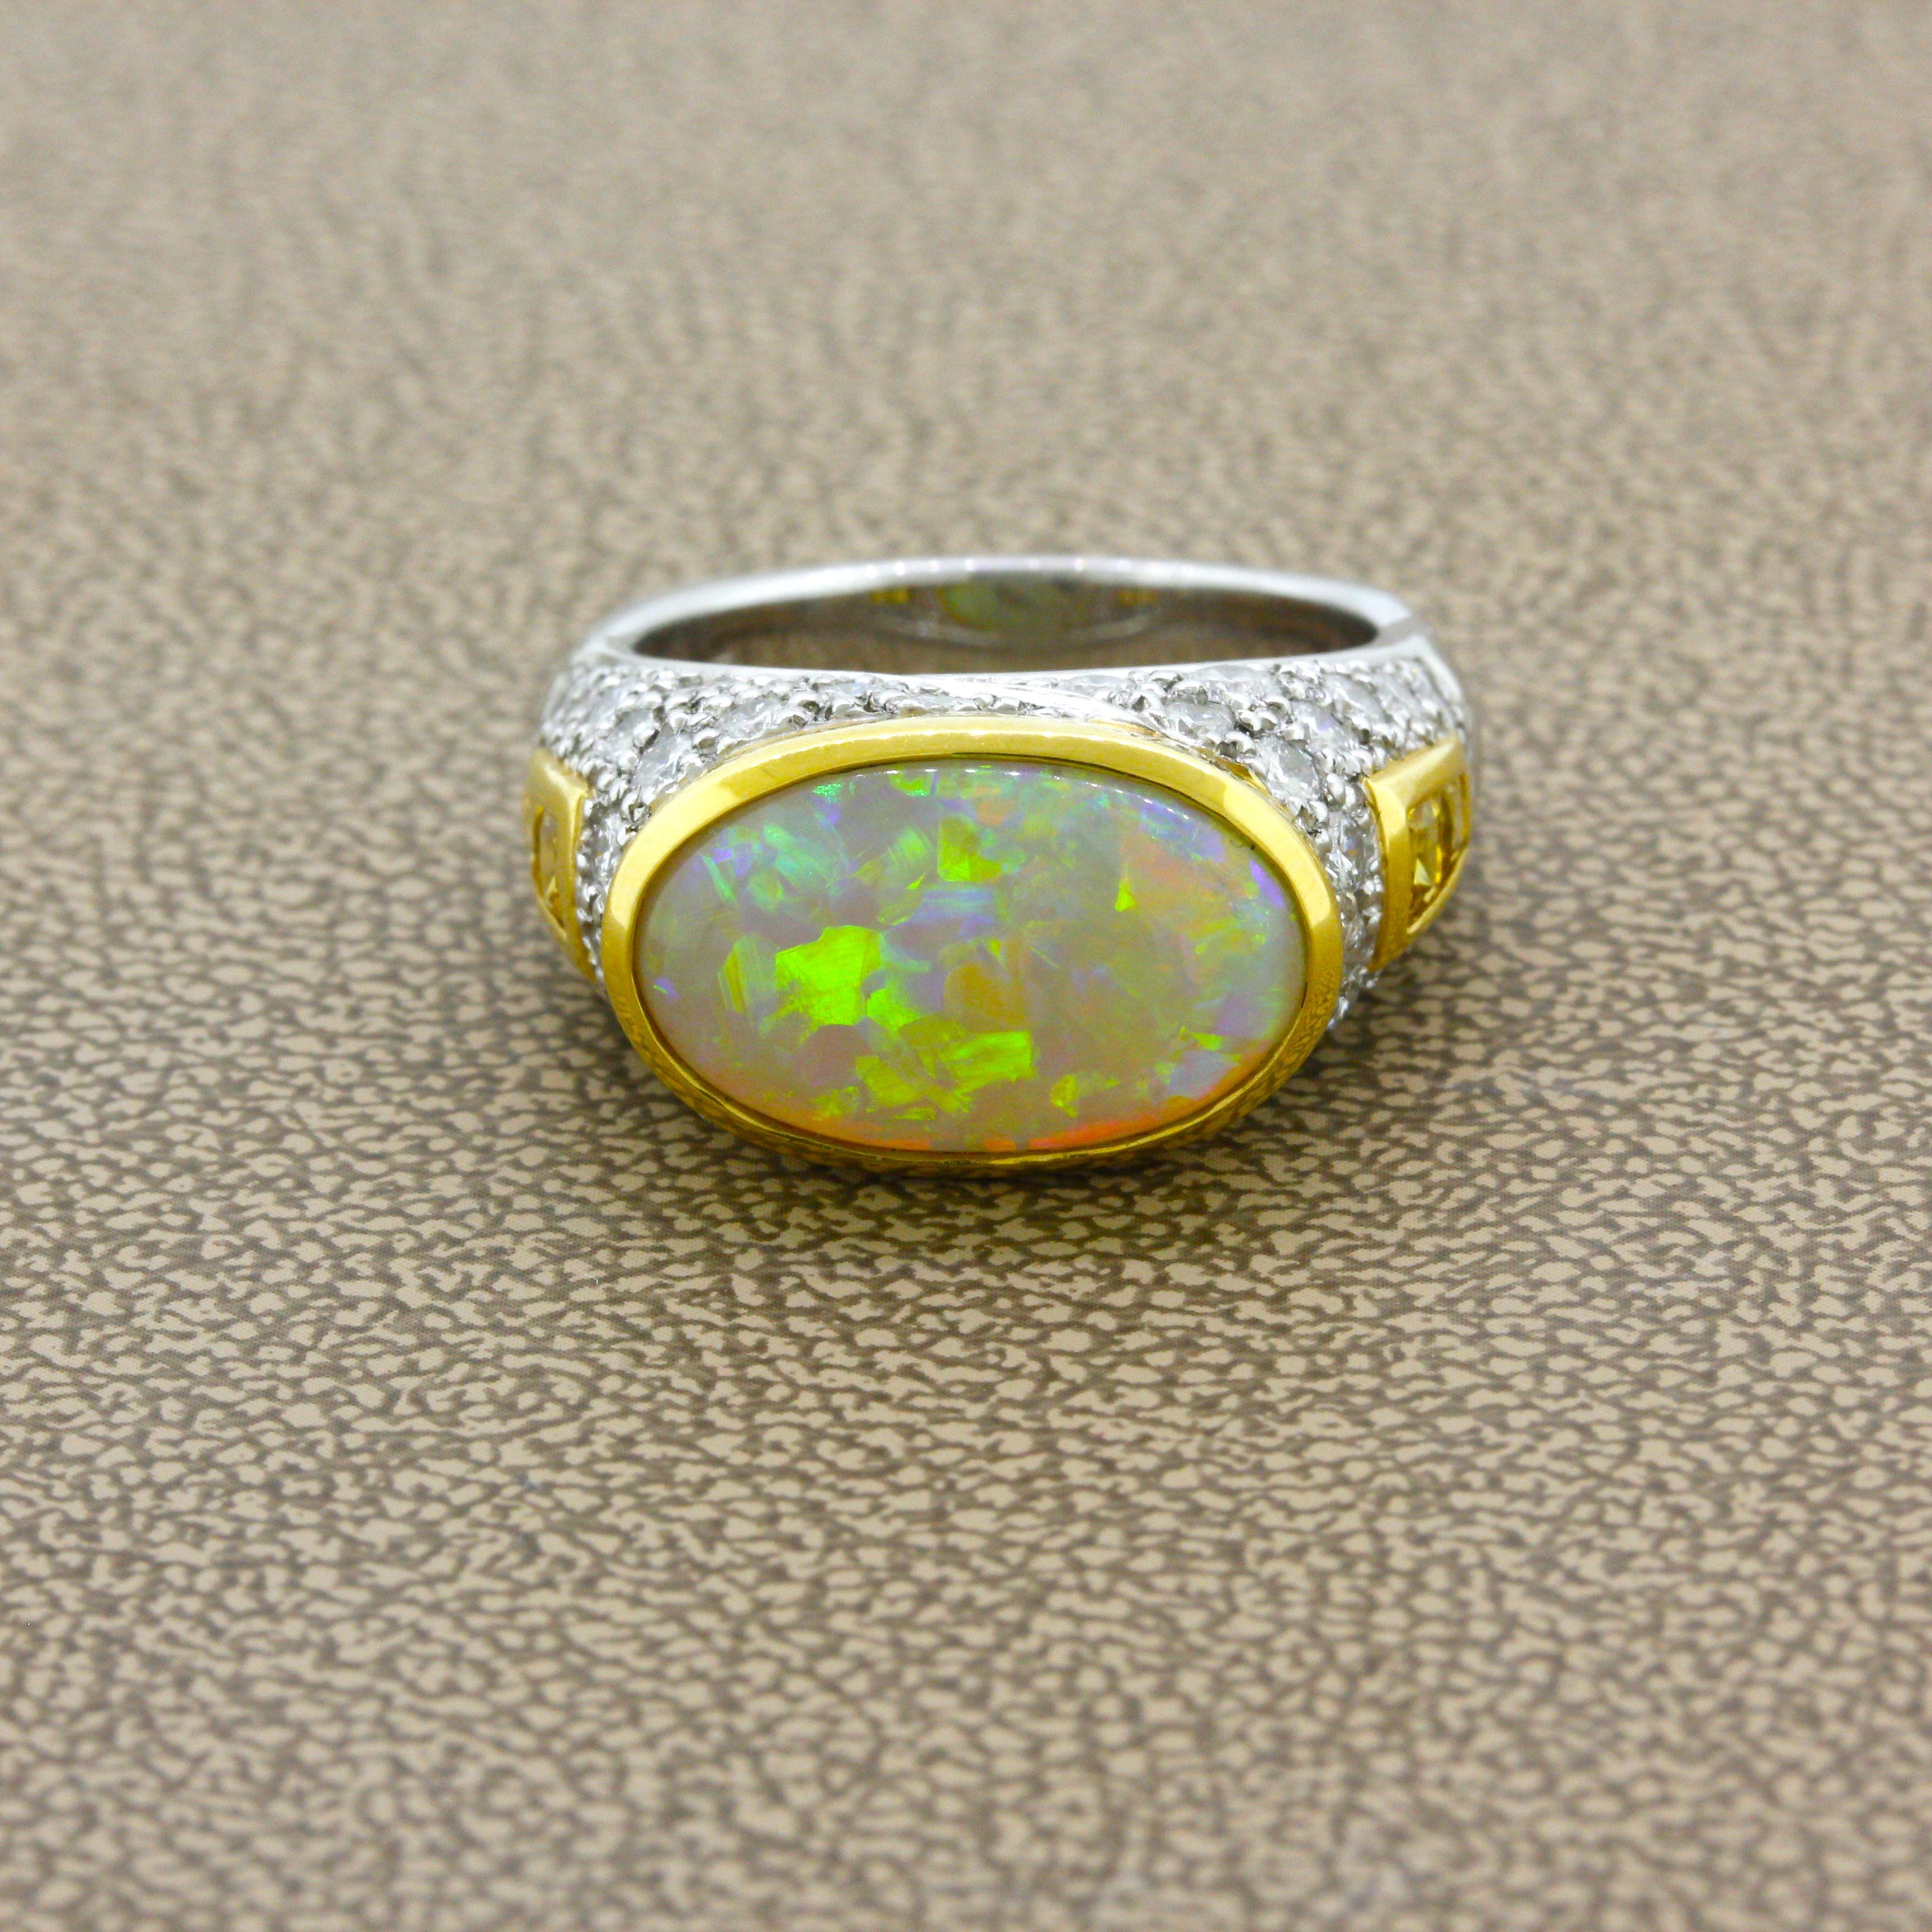 A superb Australian opal weighing 4.45 carat takes center stage of this lovely two-tone platinum gold ring. The opal has excellent play-of-color as gorgeous flashes of green, blue, orange, violet, and yellow dance across the stone. It is